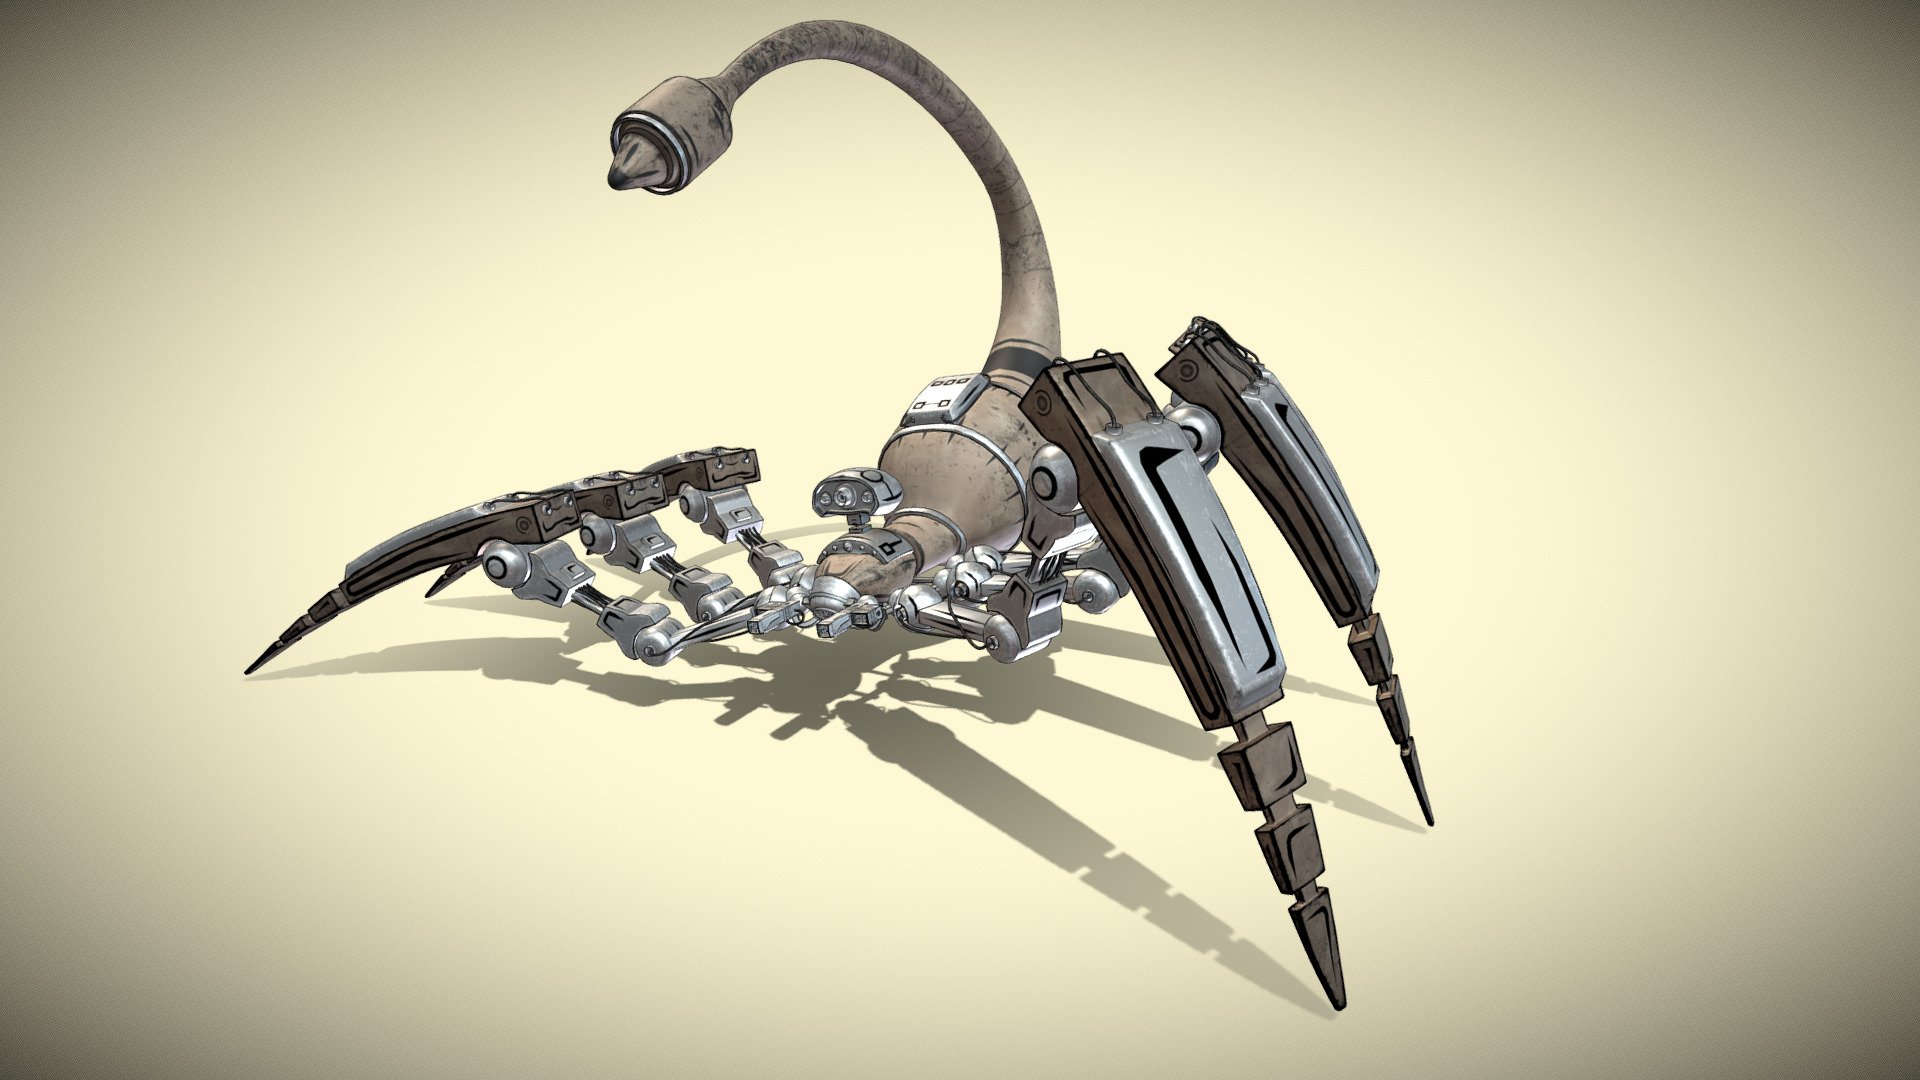 Mecha Spider Scorpion, rigged and animated, toon shader.
UV Unwrapped and textured. 
Comes with textures at 2k and 4k resolution. 

The model contains 6 objects, 2 sets of materials, and 1 set of textures. 
Modeled in Blender, painted in Substance Painter. 

Blend file before modifiers has 37.376 Faces, 73.088 Triangles, 39.053 Vertices.

Video Preview: https://youtu.be/gxfYBDKzyp4 - Mecha Spider Scorpion - Buy Royalty Free 3D model by Ed.Jan 3d model